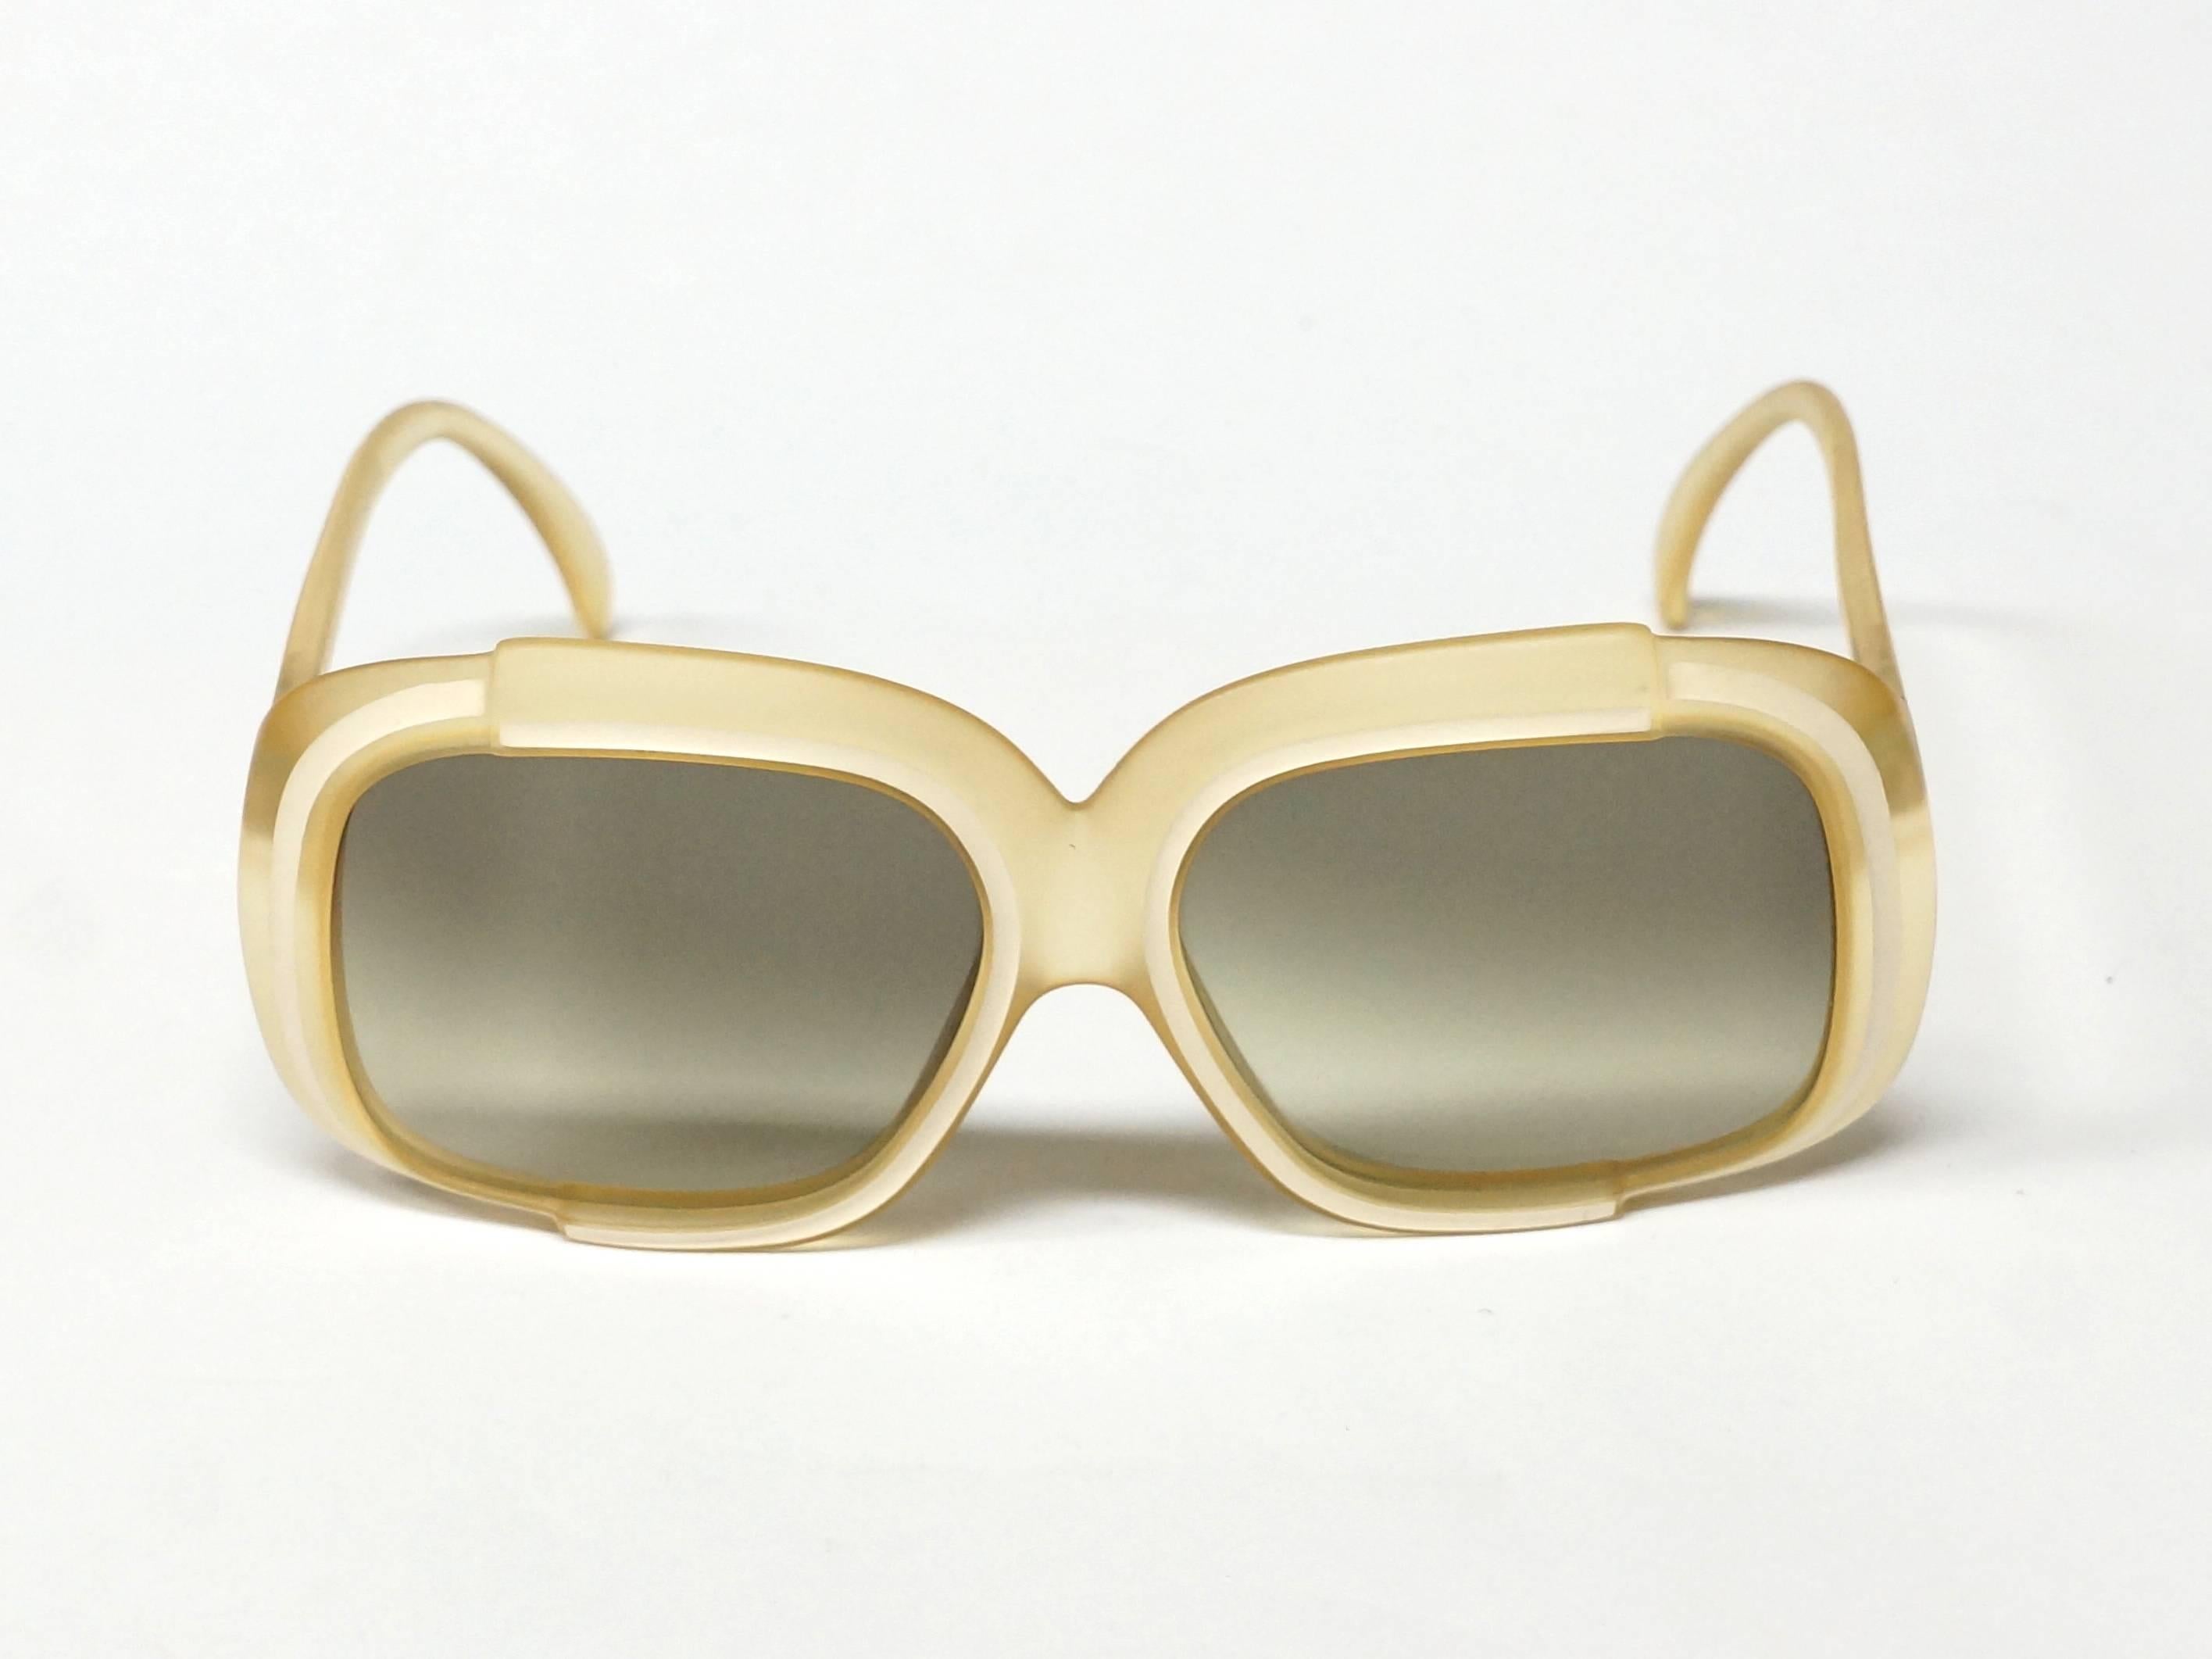 Women's 1970s Dior Sunglasses in New Old Stock Condition For Sale